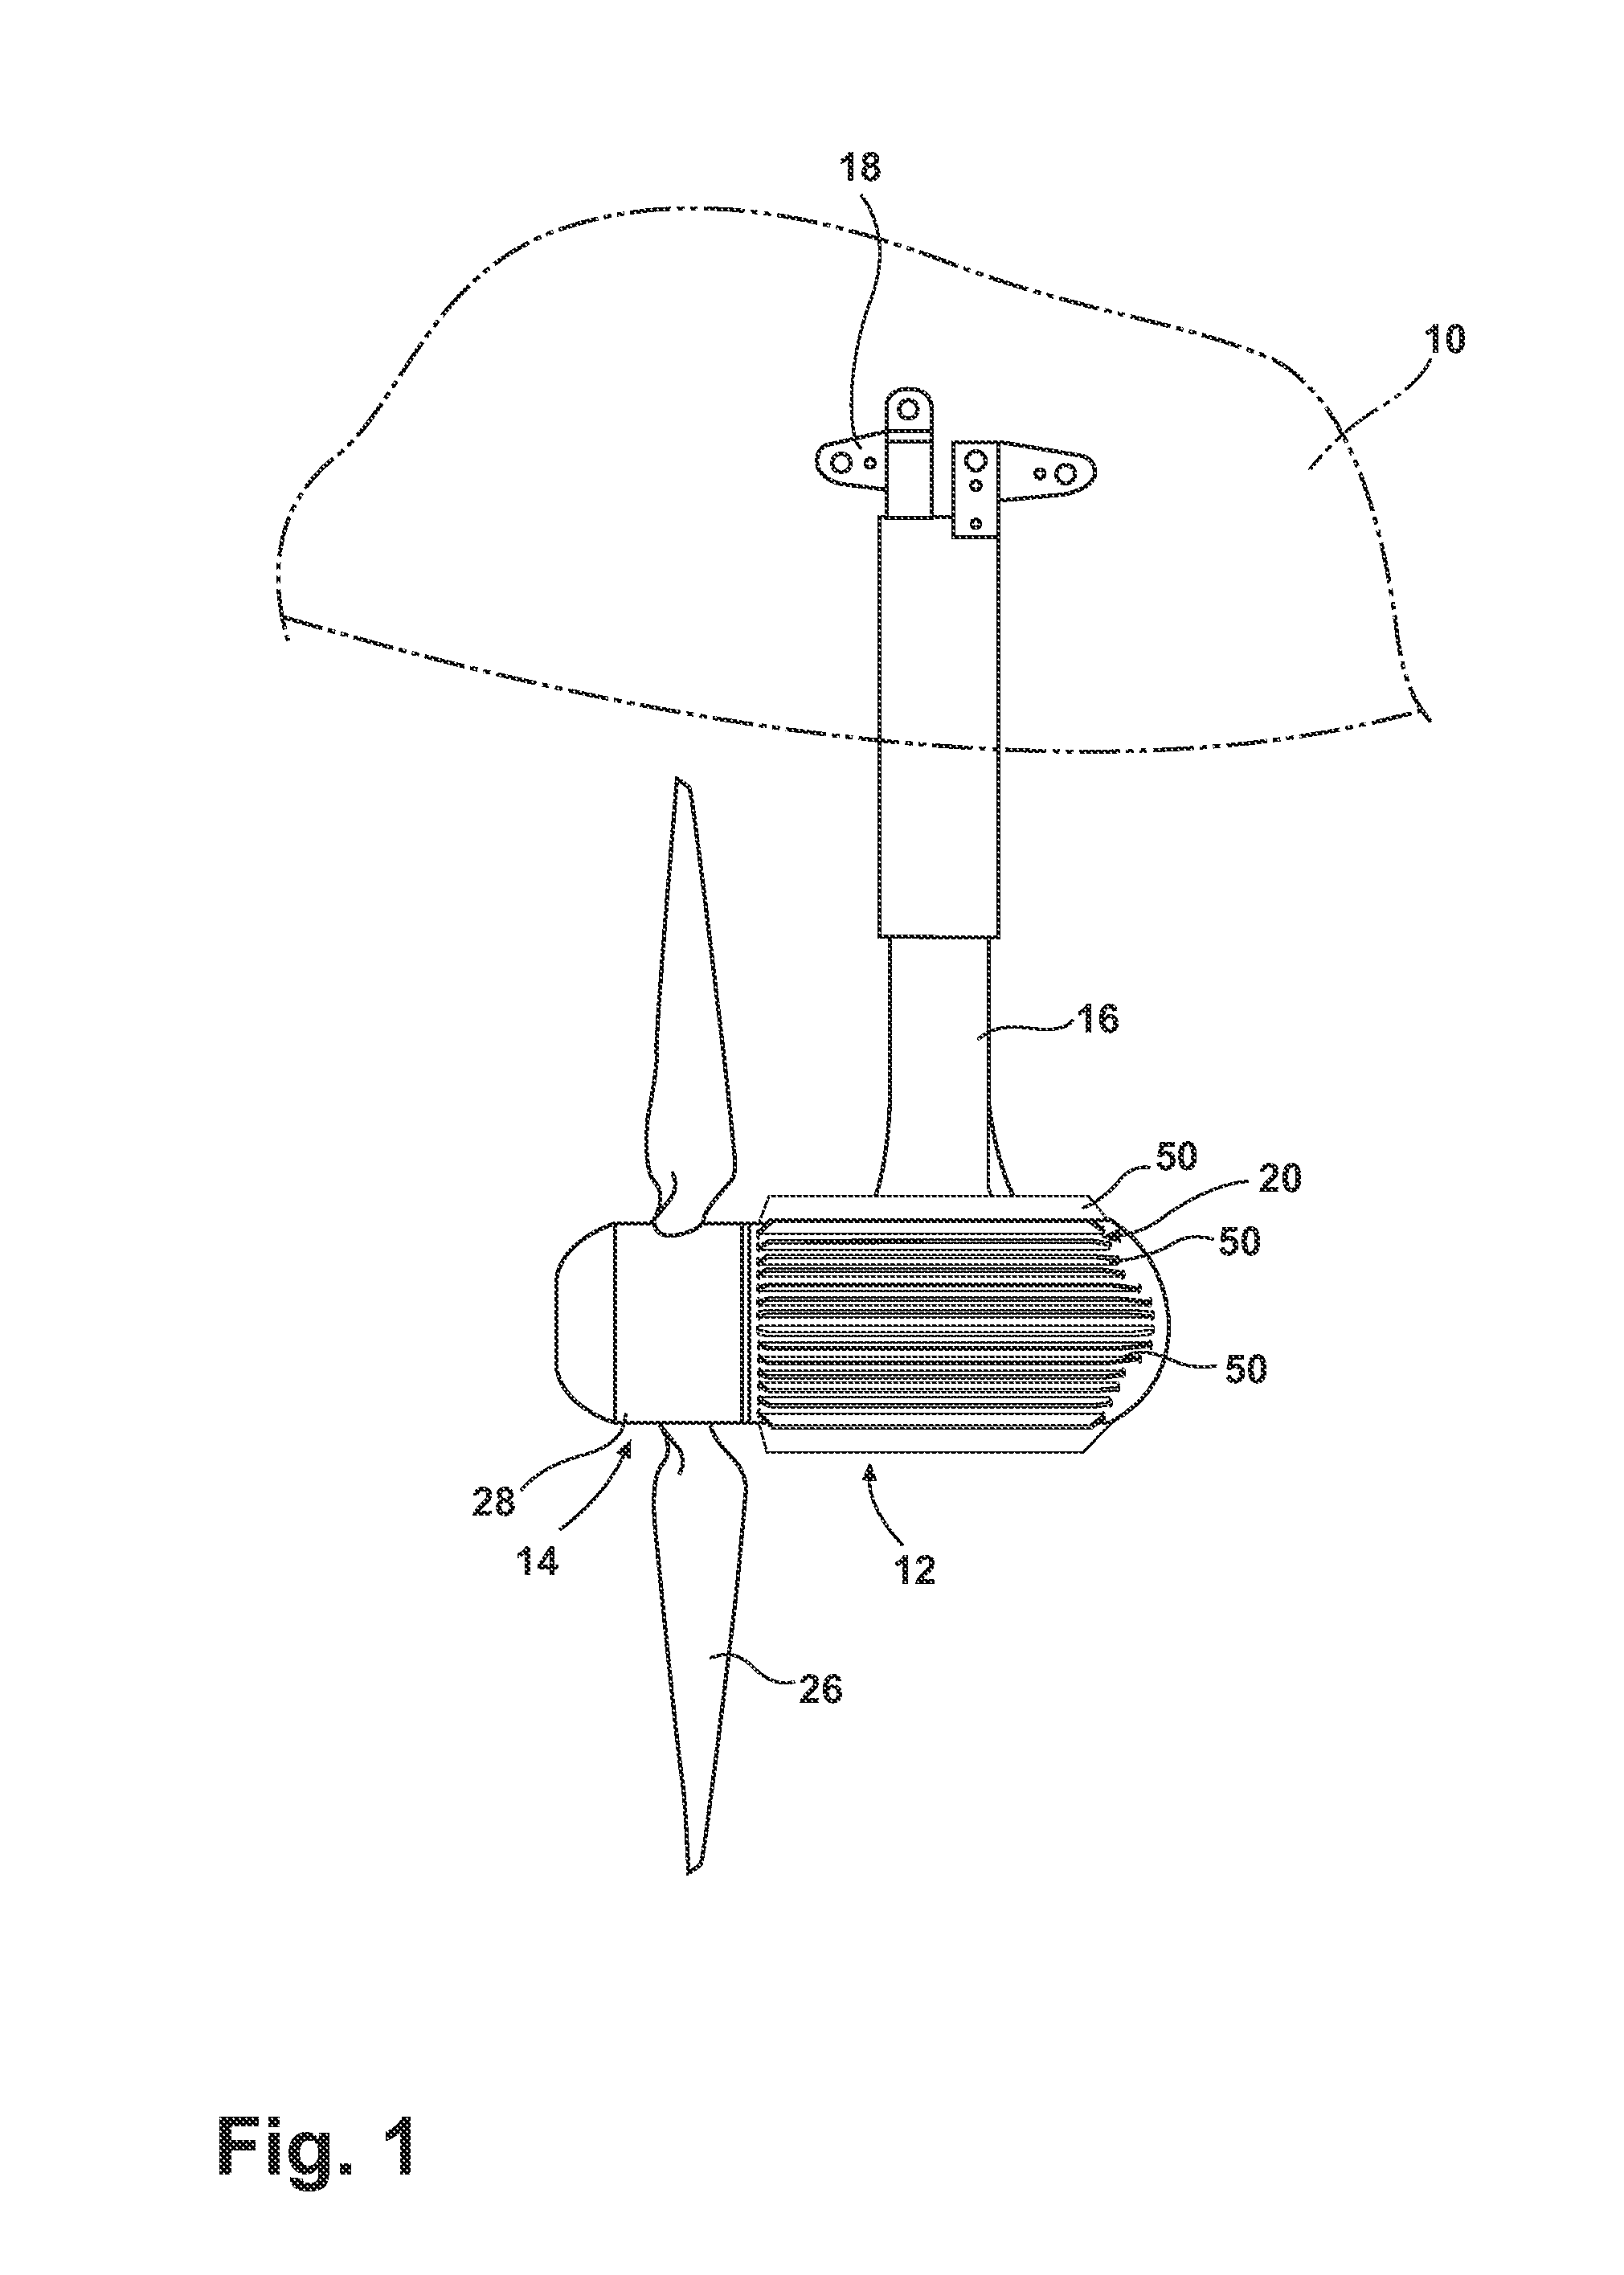 Ram air turbine with integrated heat exchanger